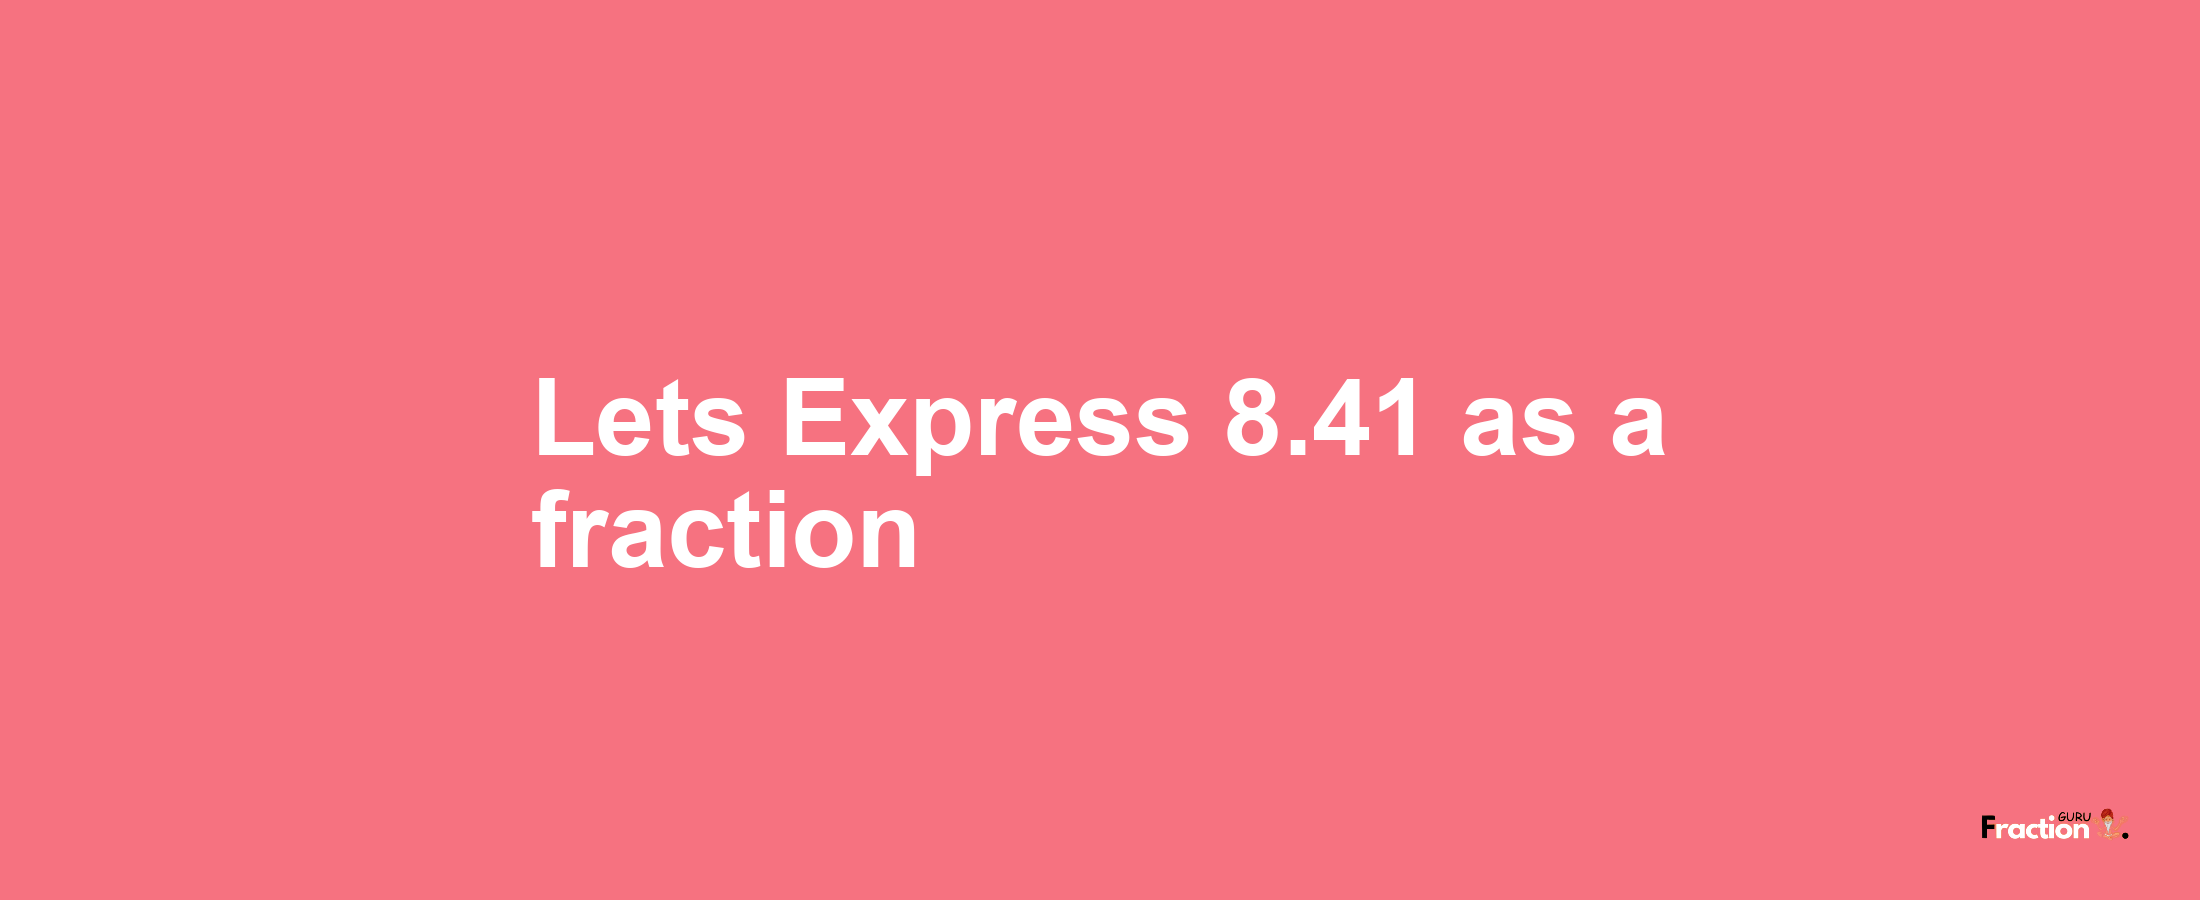 Lets Express 8.41 as afraction